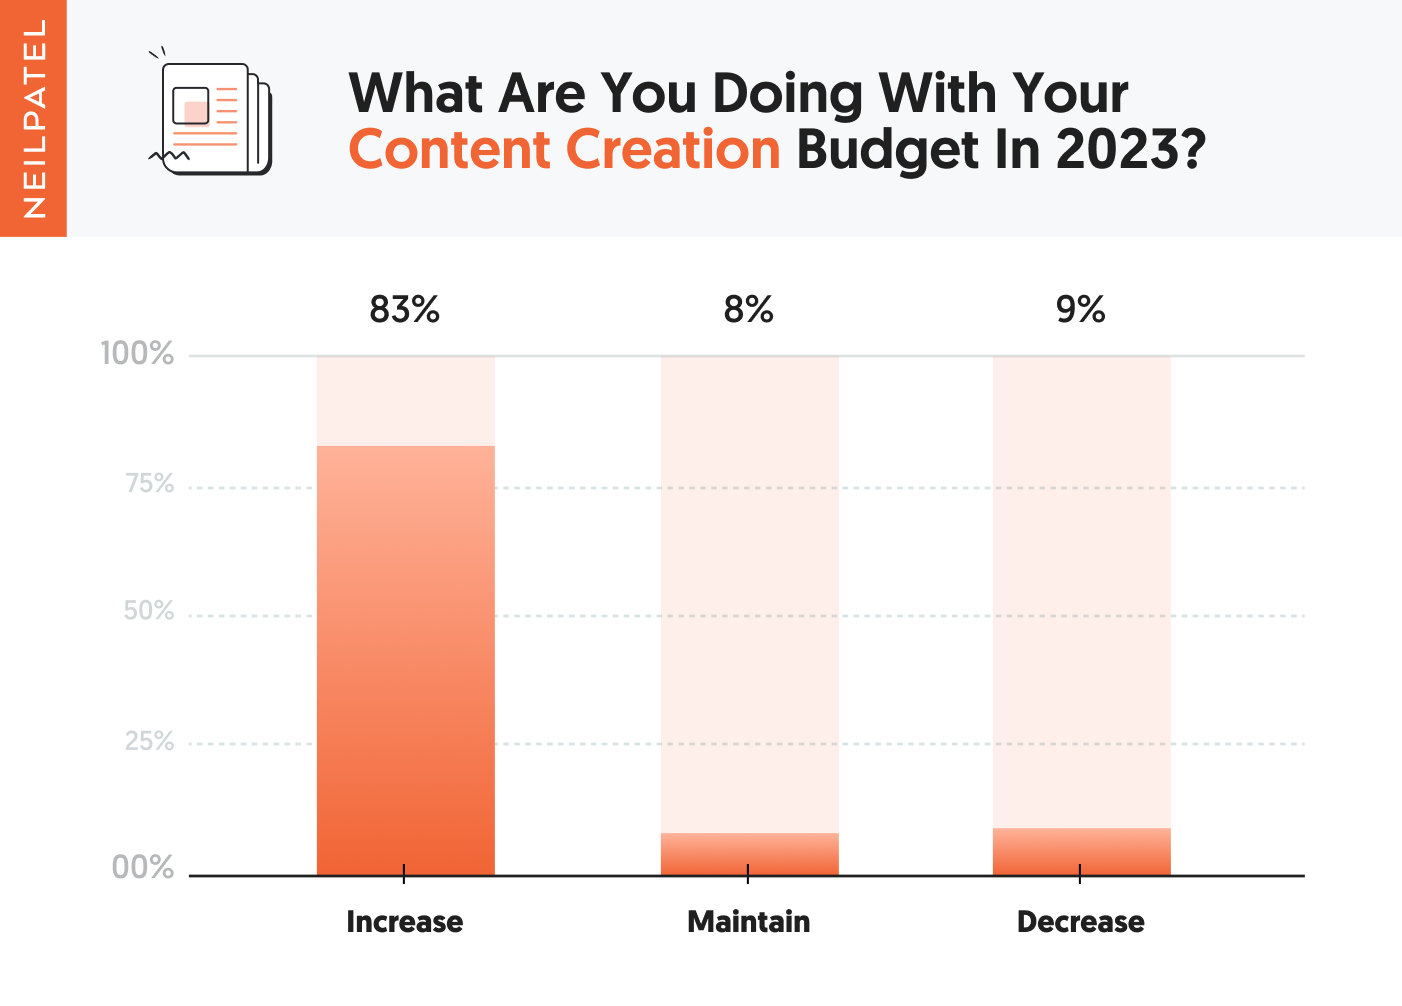 What are you doing with your content creation budget in 2023